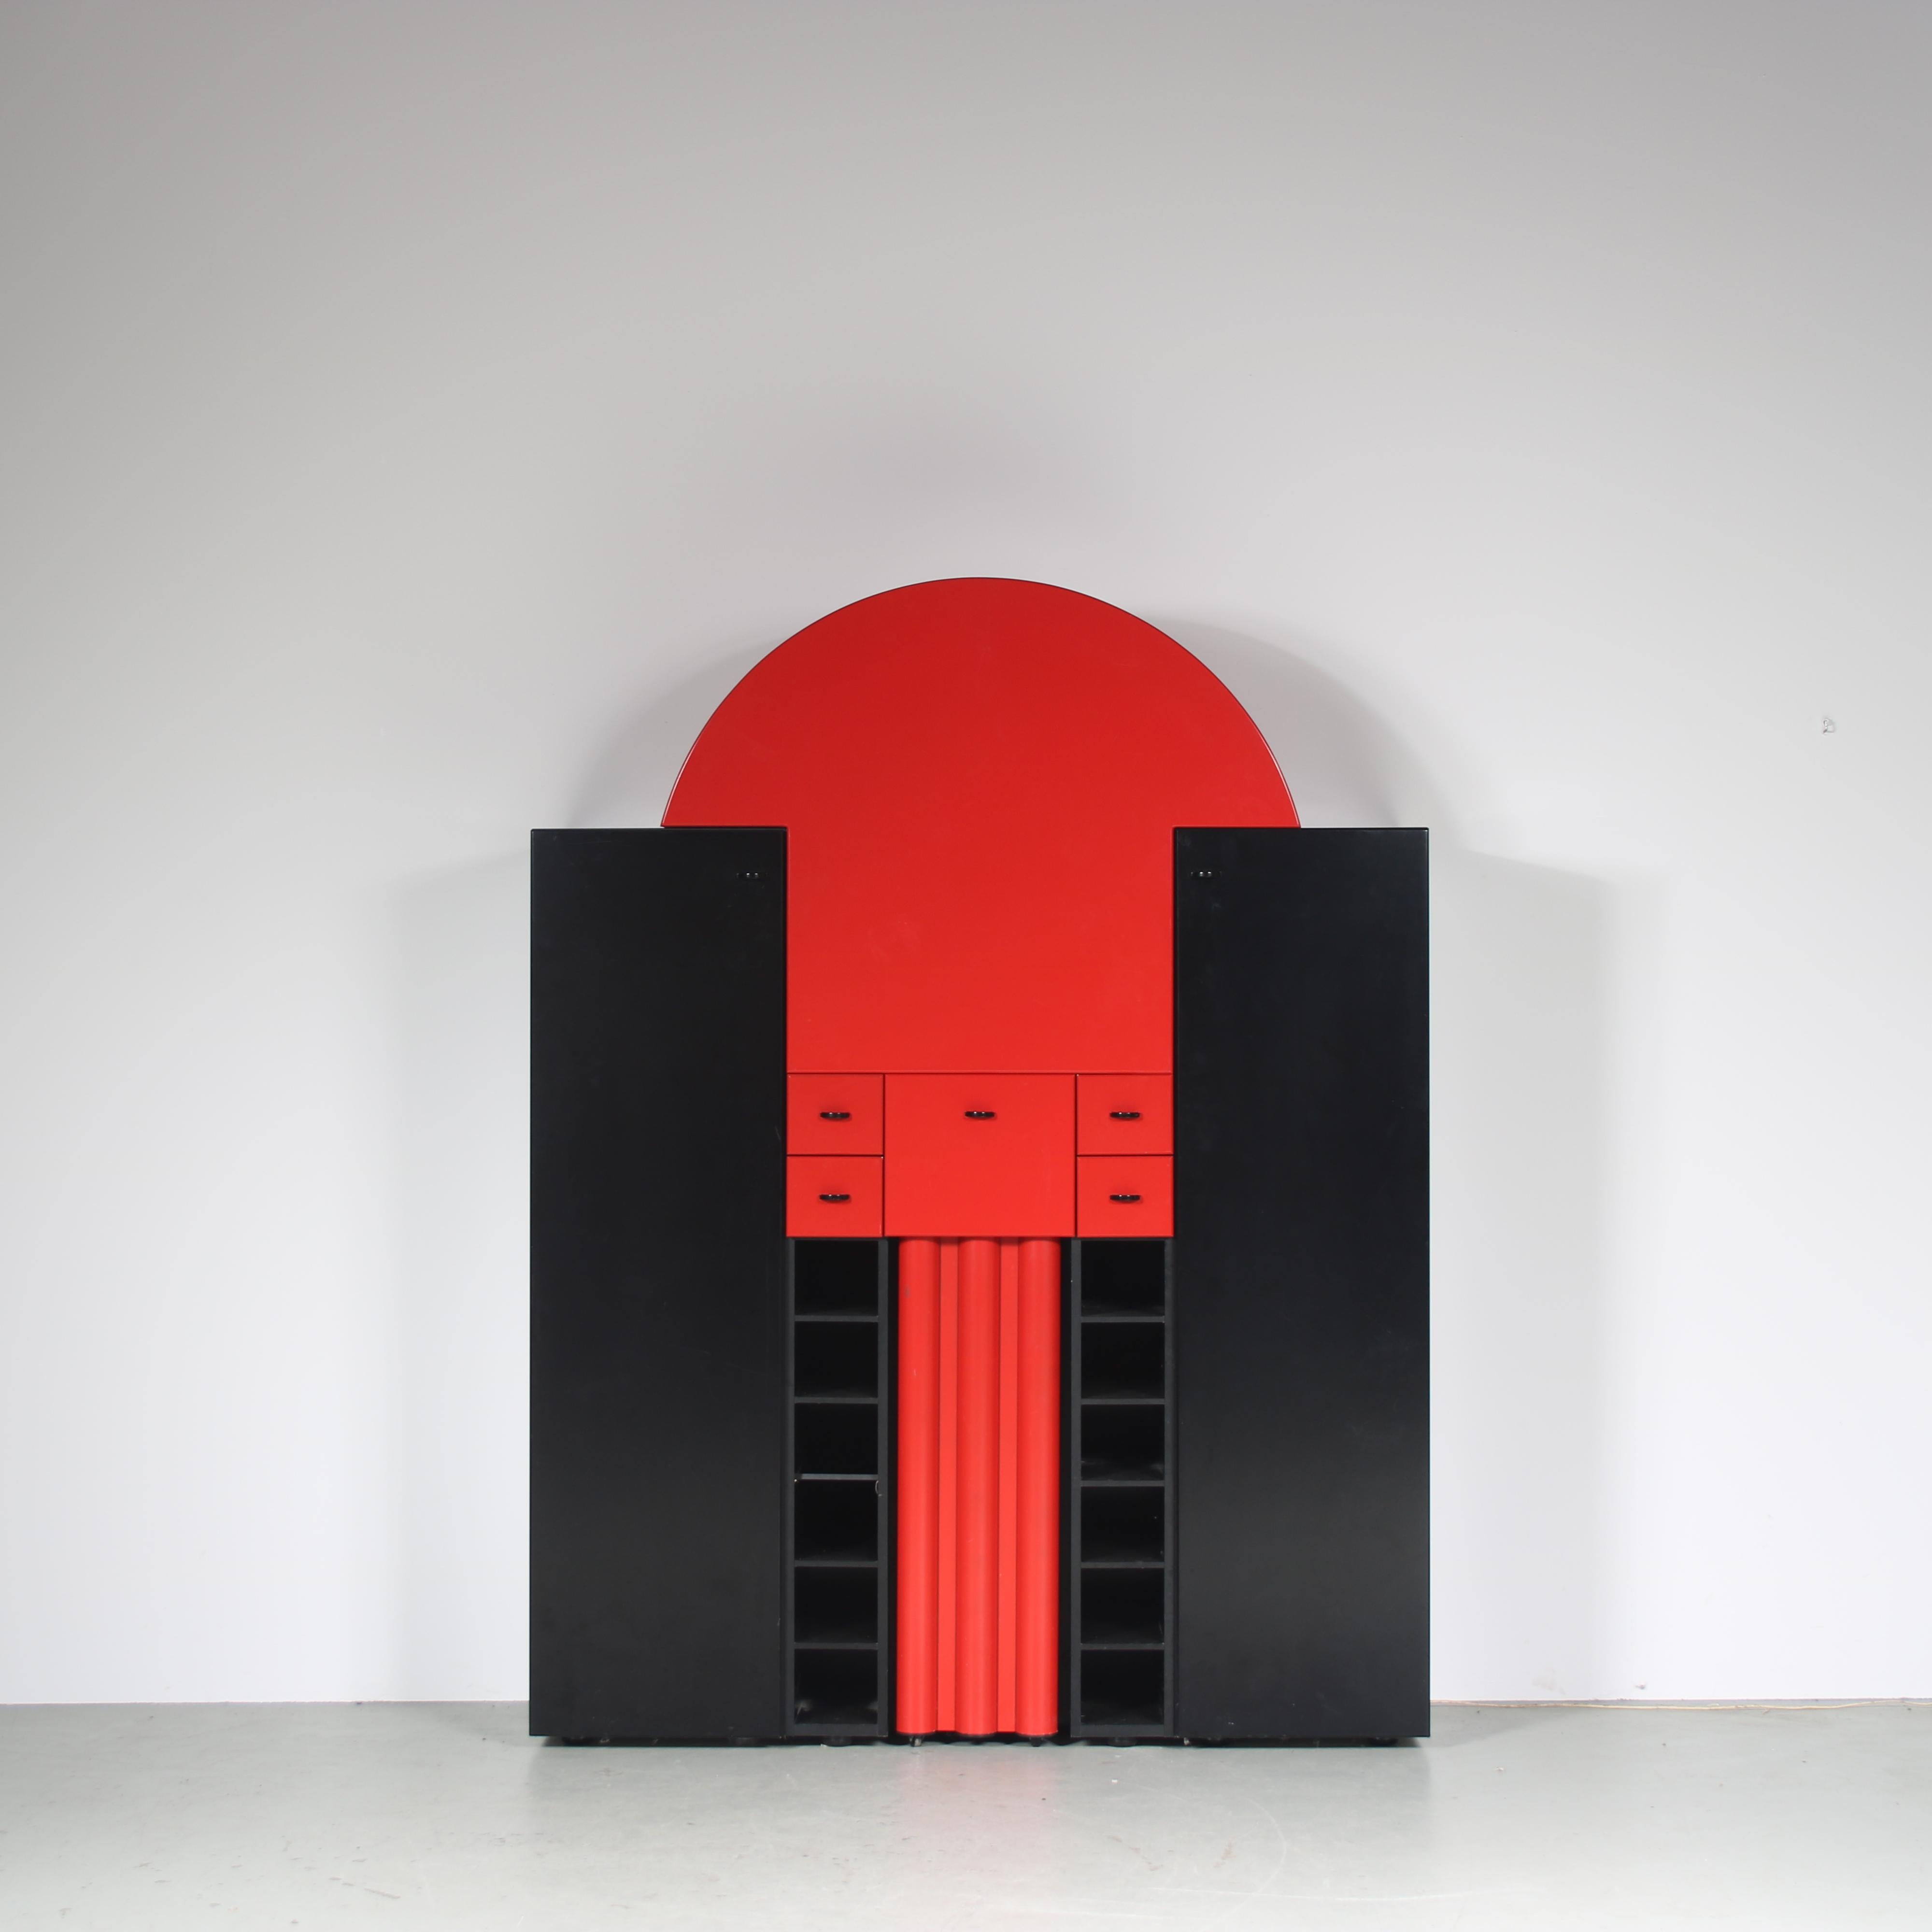 An eye-catching bar cabinet, model “Duo”, designed by Peter Maly and manufactured by Interlübke in Germany around 1980.

This piece has a unique, post modern style that combines round and square shapes in contrasting black and red laminated wood. It